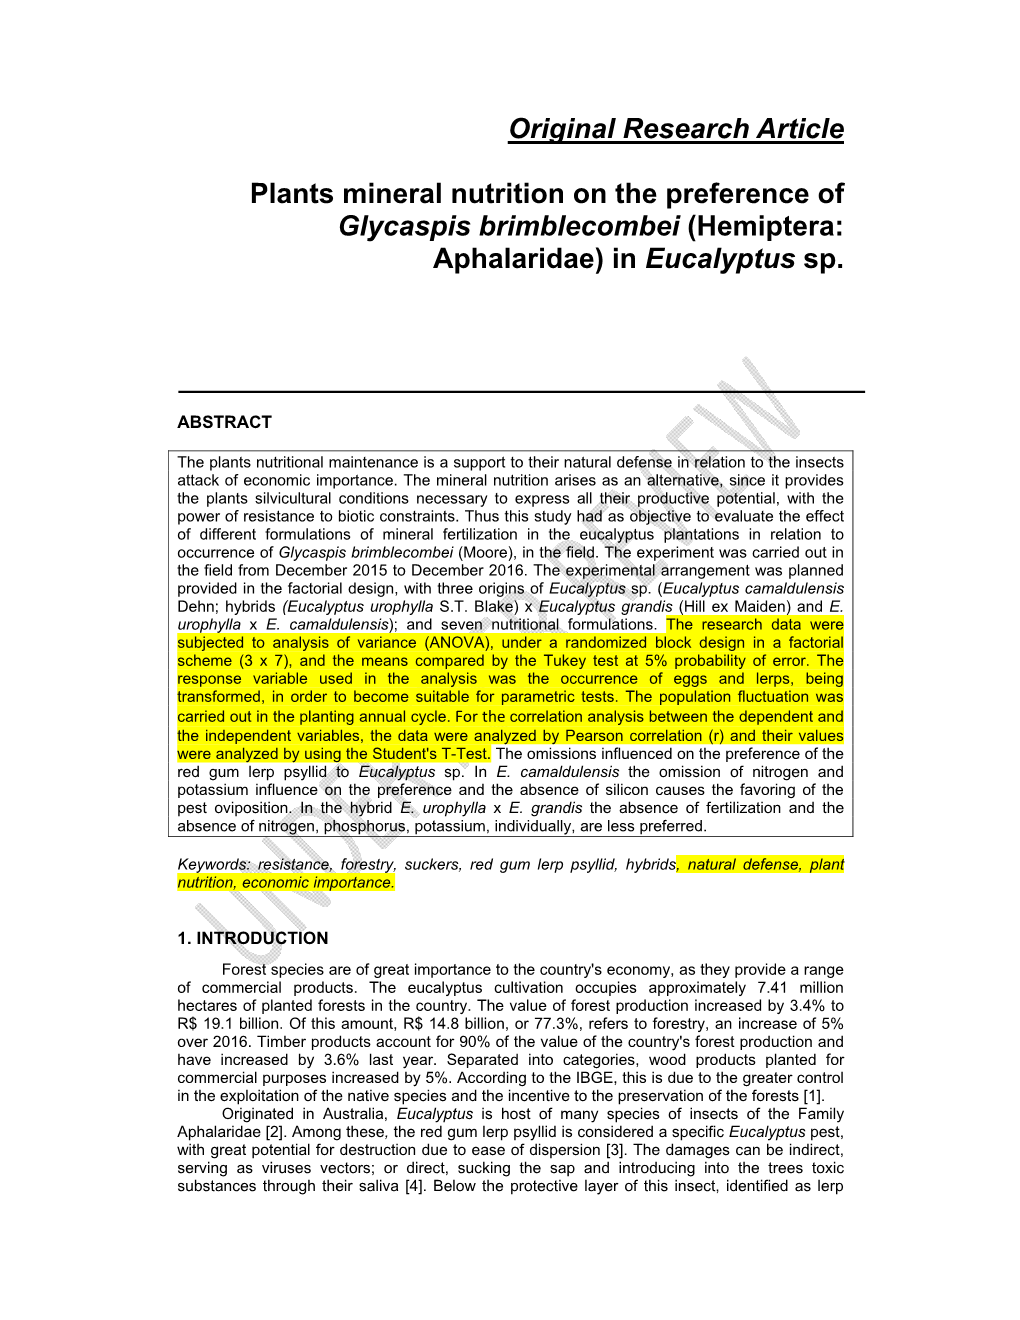 Original Research Article Plants Mineral Nutrition on the Preference